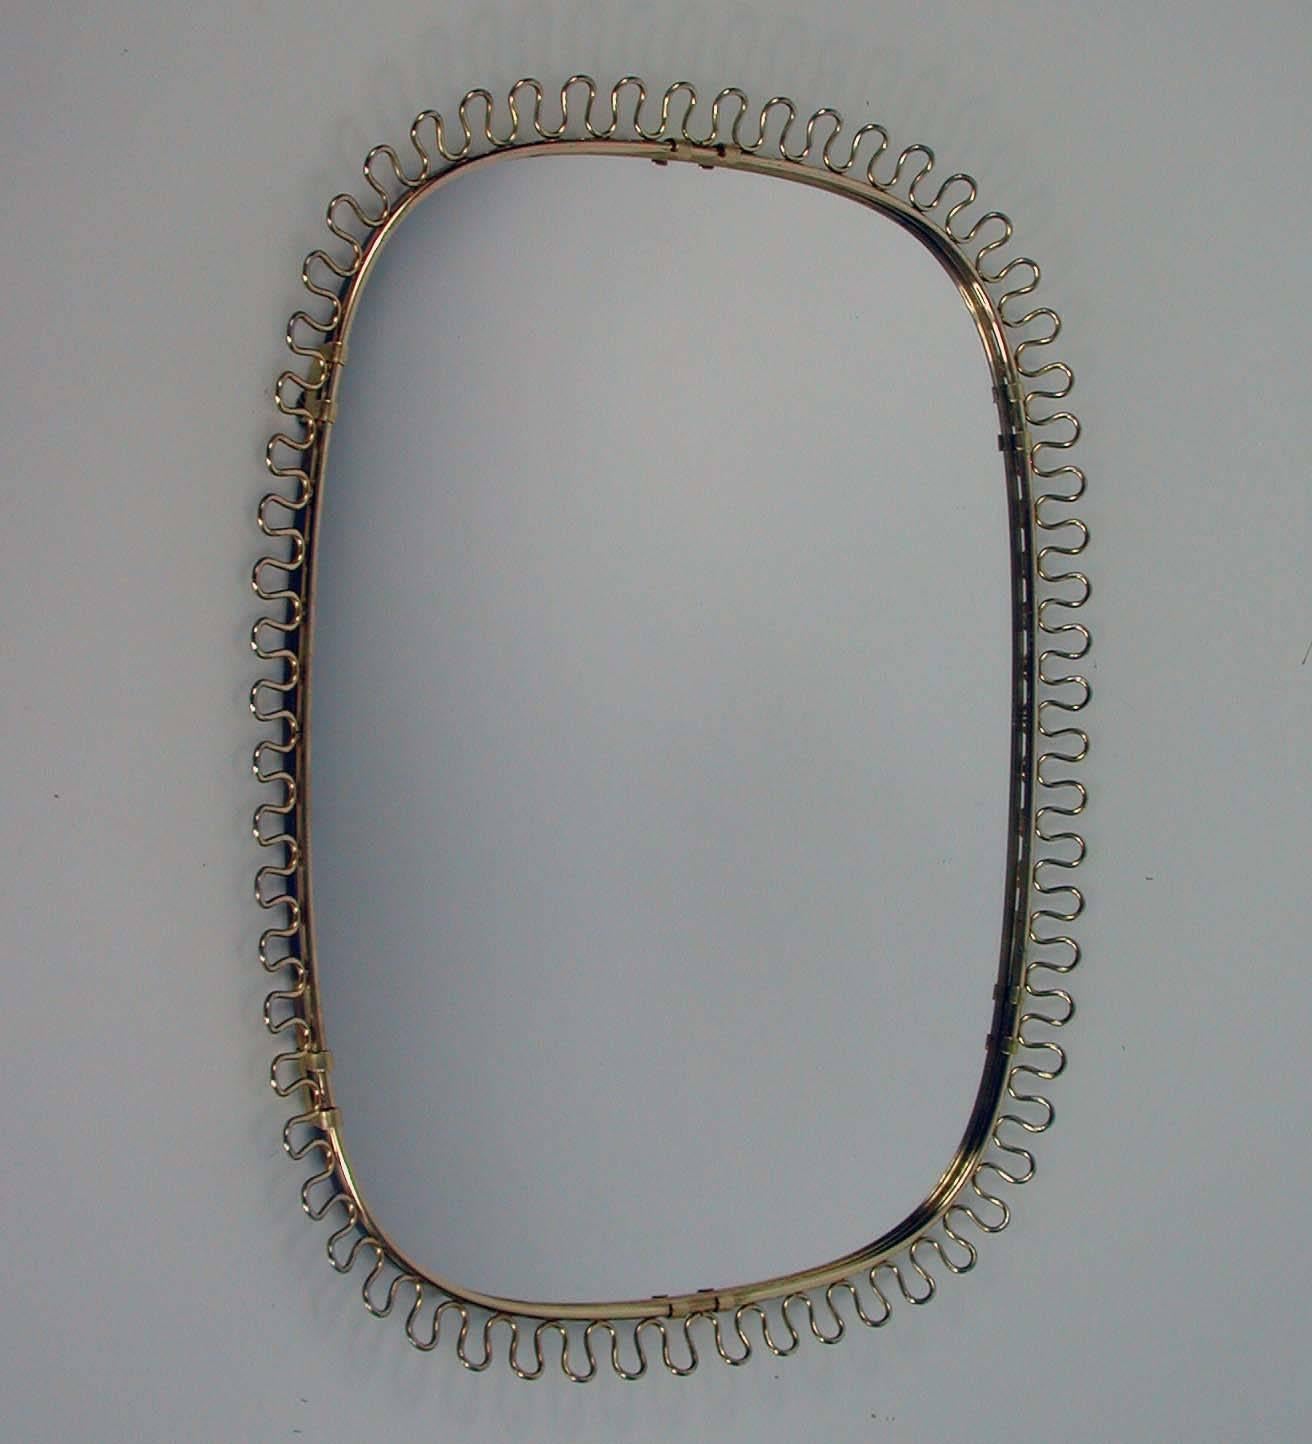 This beautiful brass loop wall mirror was designed in Sweden by Josef Frank for Svenskt Tenn in the 1950s. The brass frame with nice warm vintage patina.